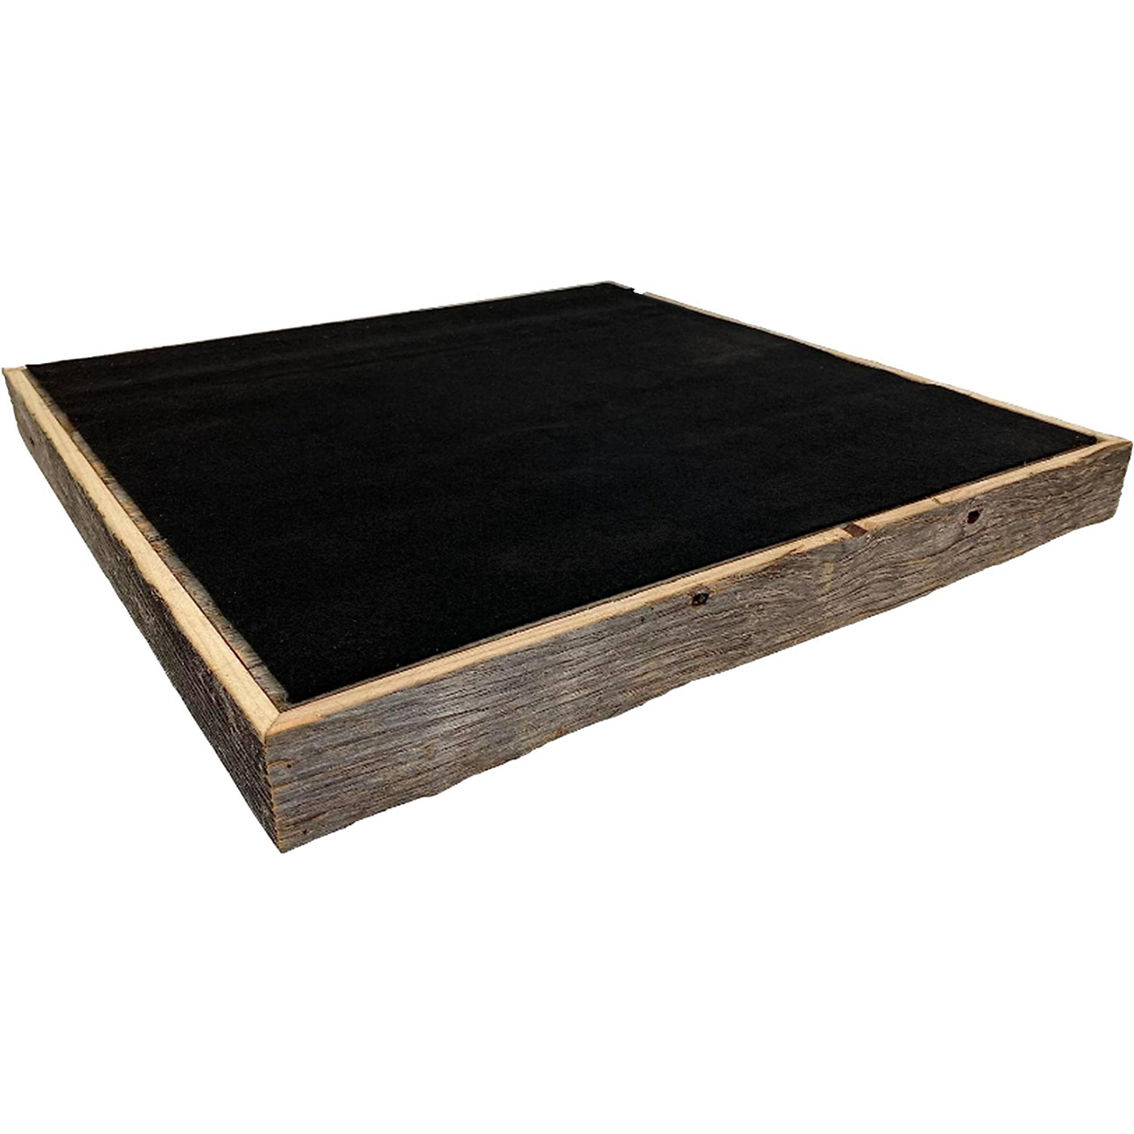 Barnwood USA Extra Large 24 x 24 in. Ottoman Tray - Image 2 of 5